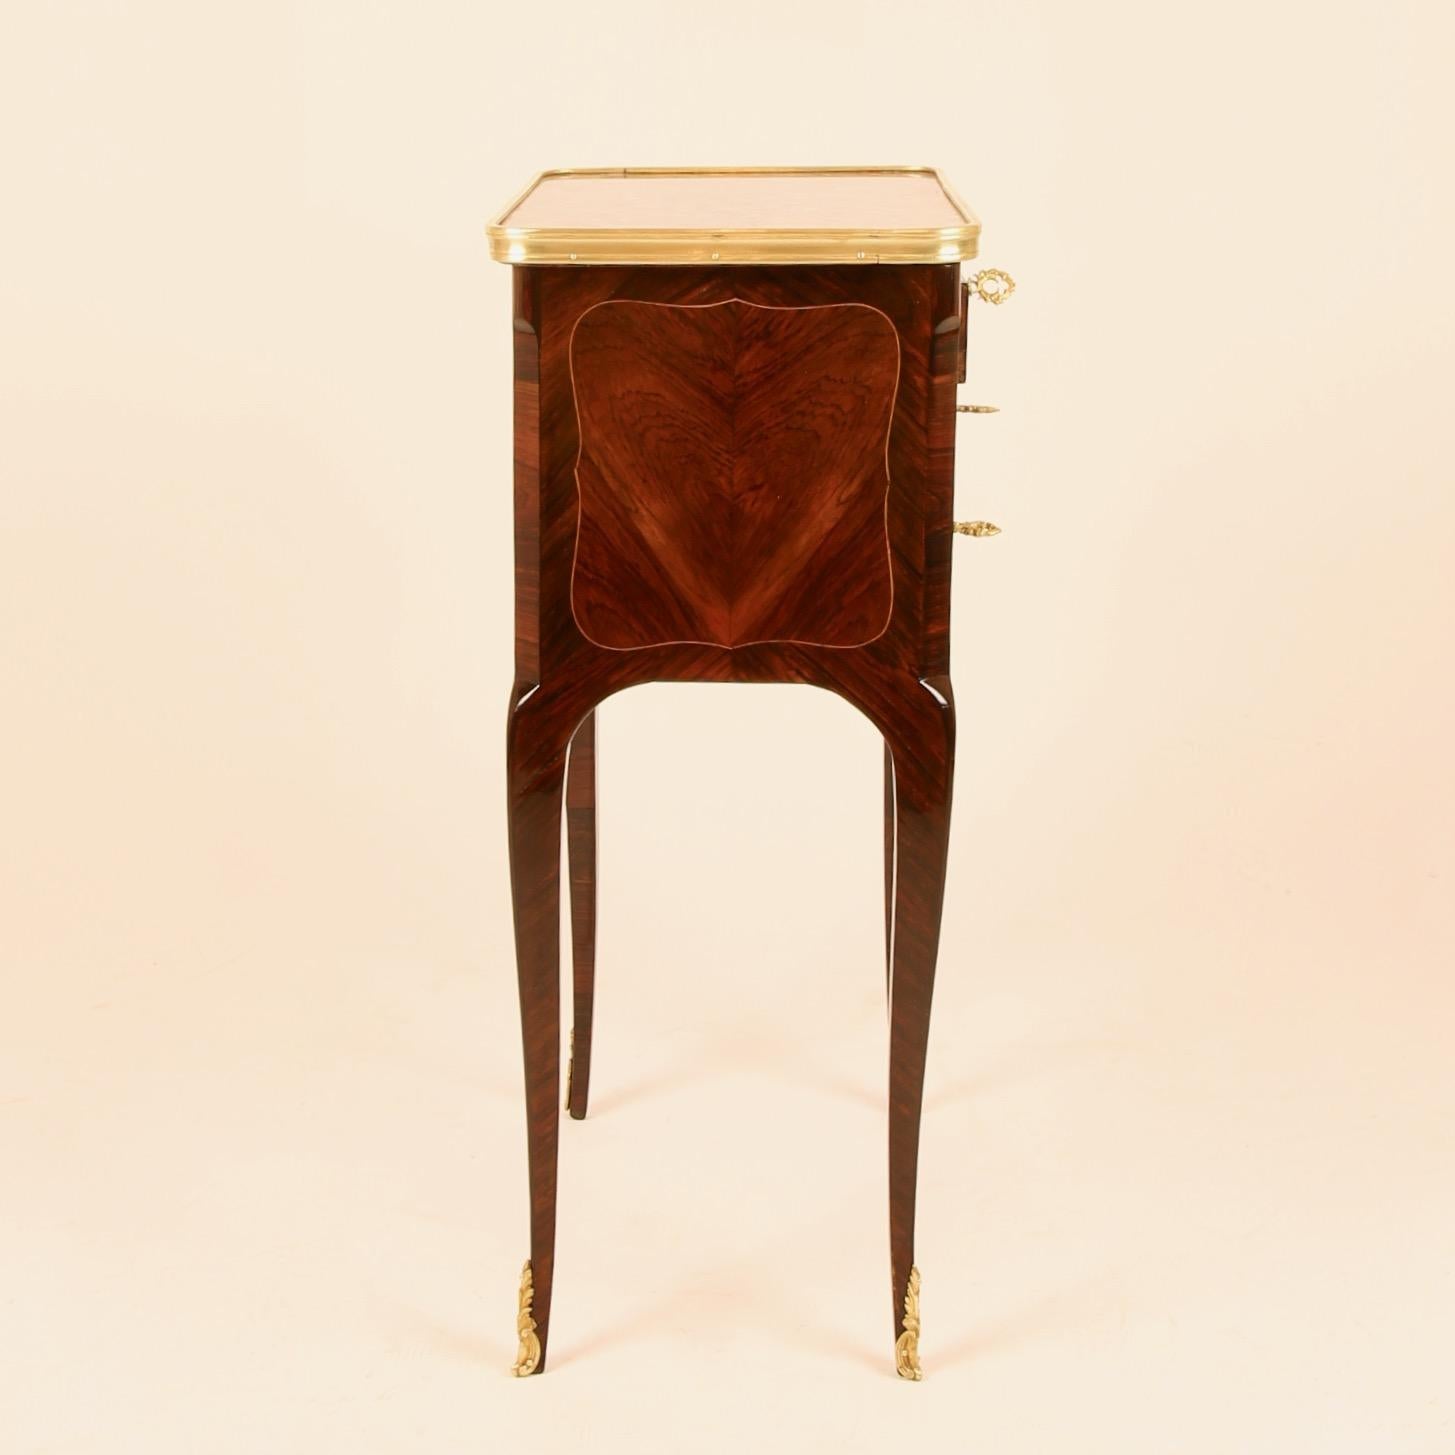 Gilt 18th Century Louis XV Transition Marquetry Marble-Top Side Table or Écritoire